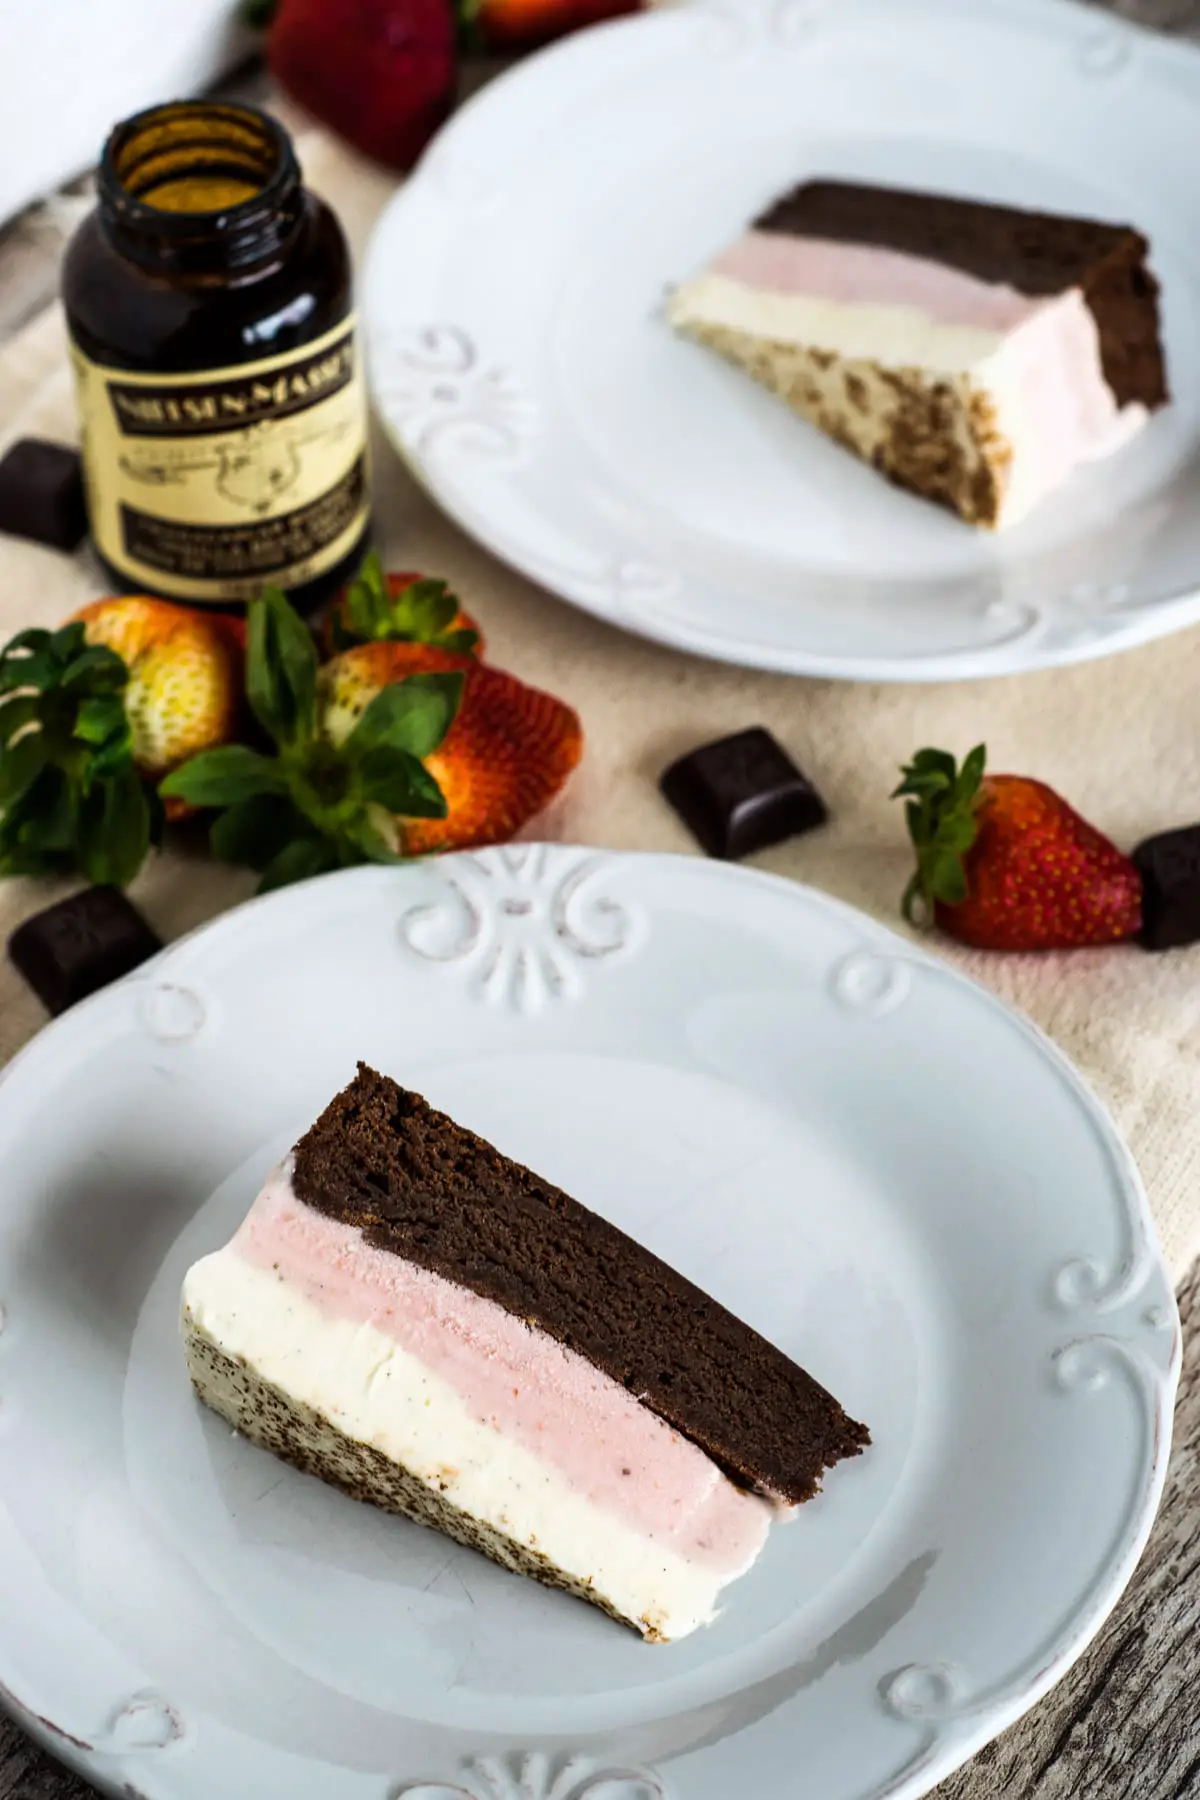 Slices of Neapolitan ice cream cake served on white plates showing the characteristic layers - chocolate, strawberry and vanilla